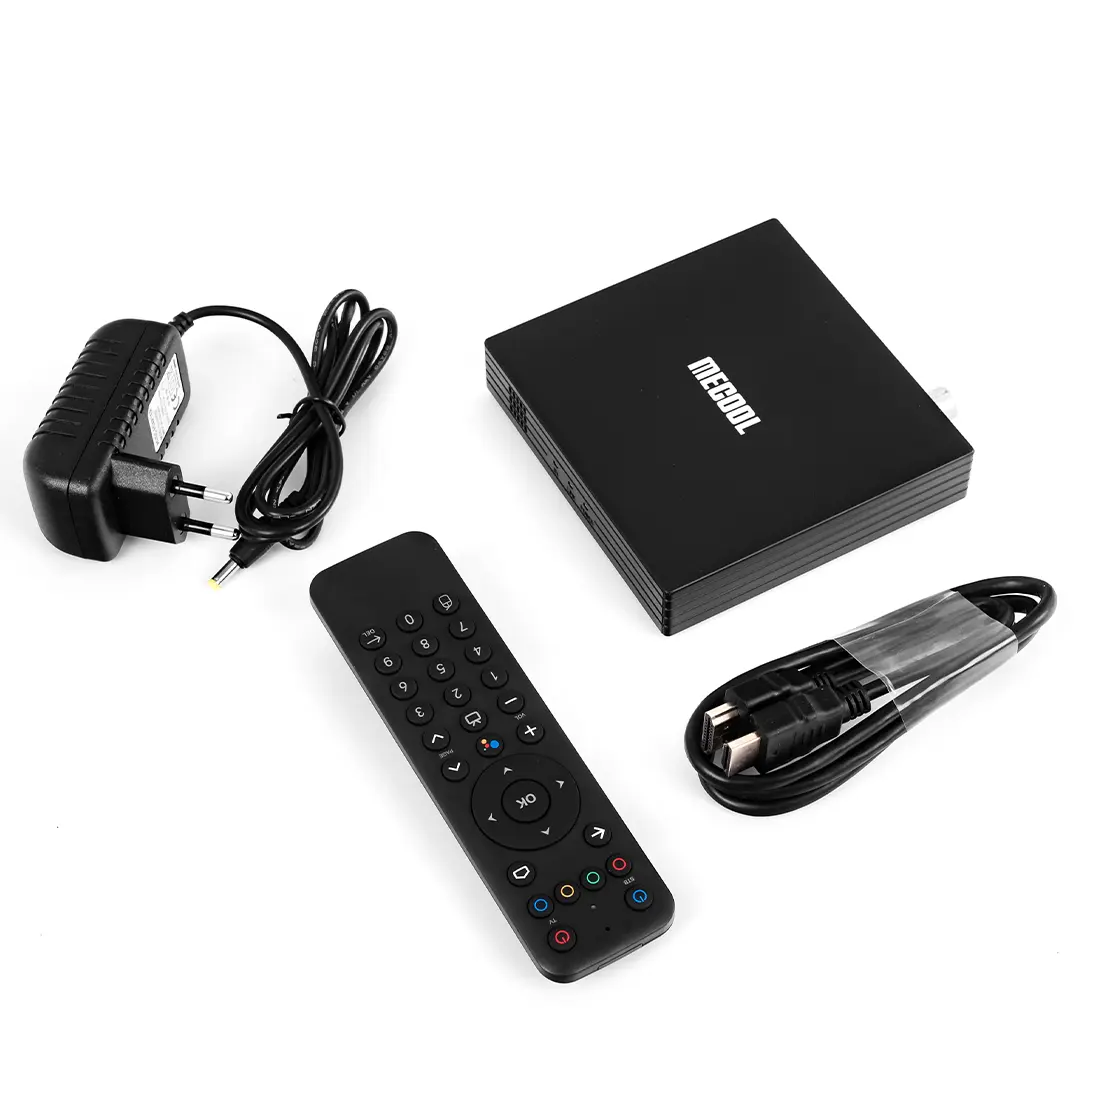 Android TV BOX MECOOL KT1 DVB-S2X 4K Android 10 WiFi z tunerem SAT